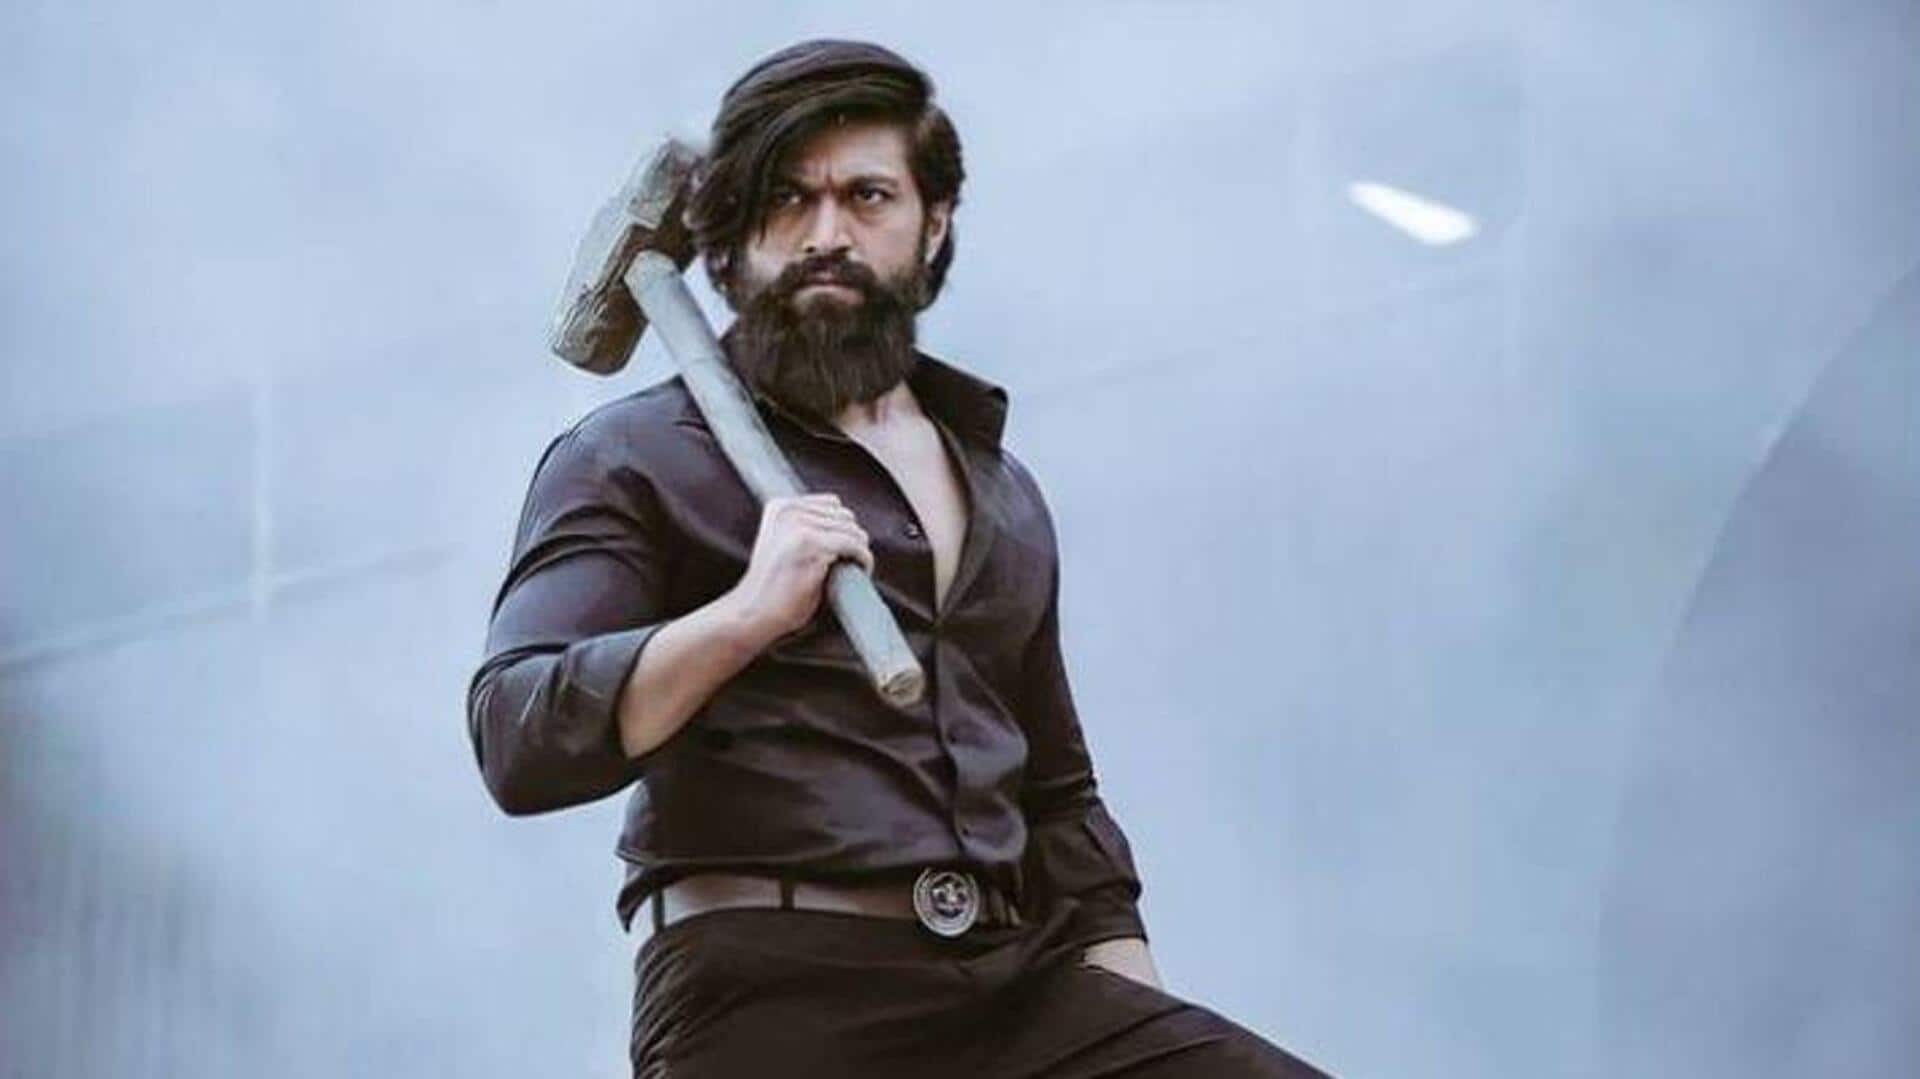 'KGF 3': Yash starrer is arriving in 2025, says report